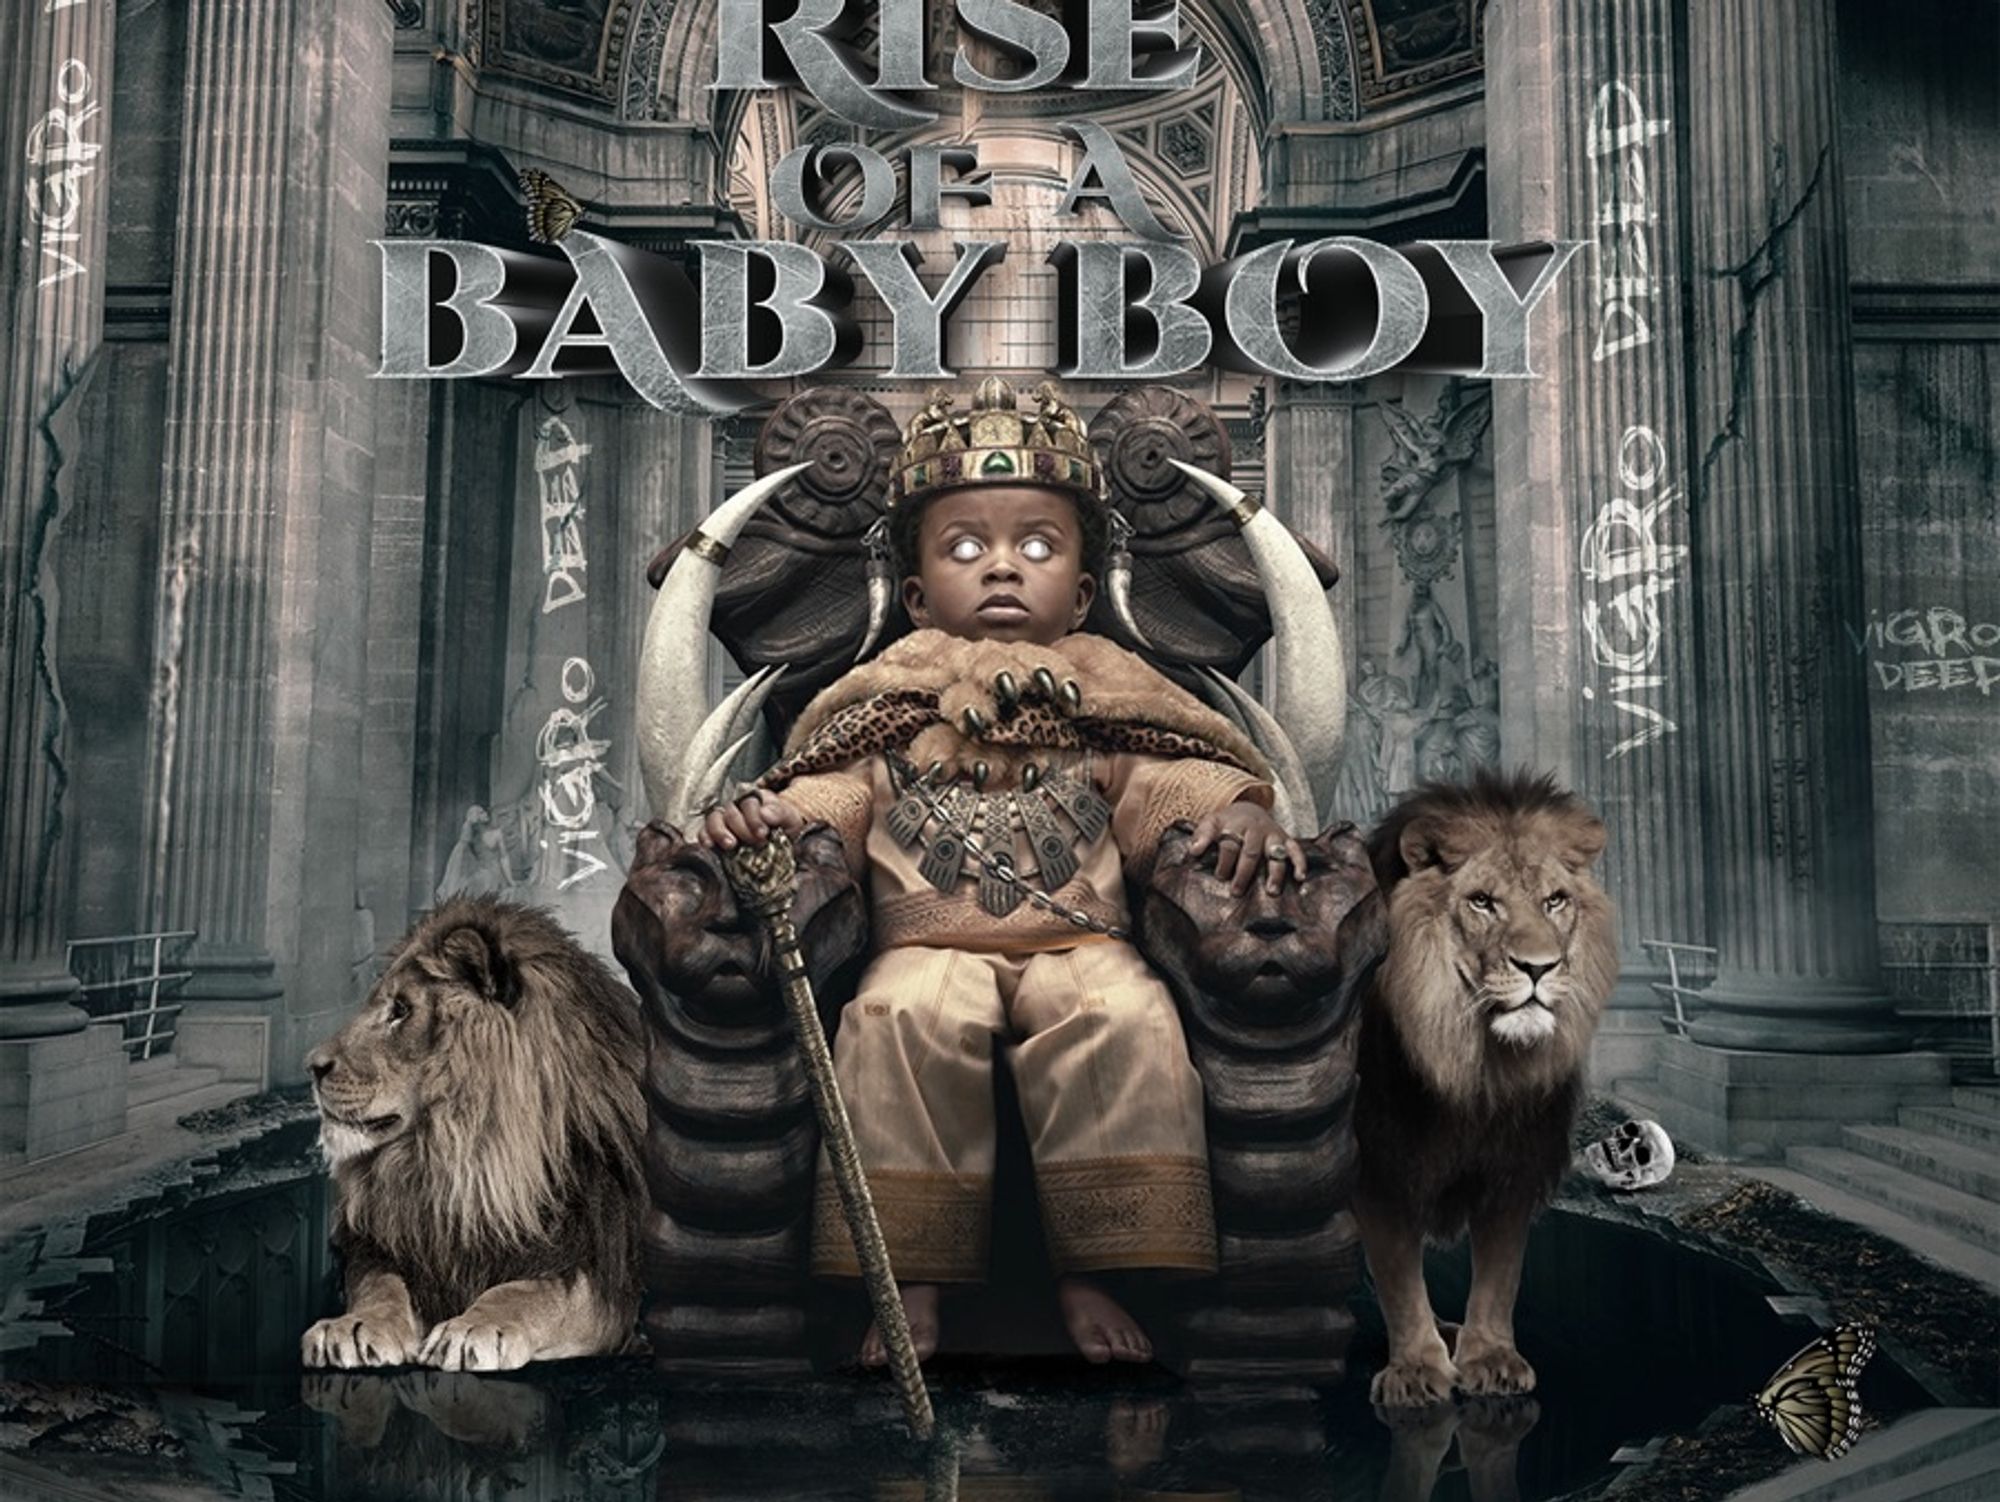 Listen to Vigro Deep’s Highly Anticipated Album ‘Rise Of Baby Boy’